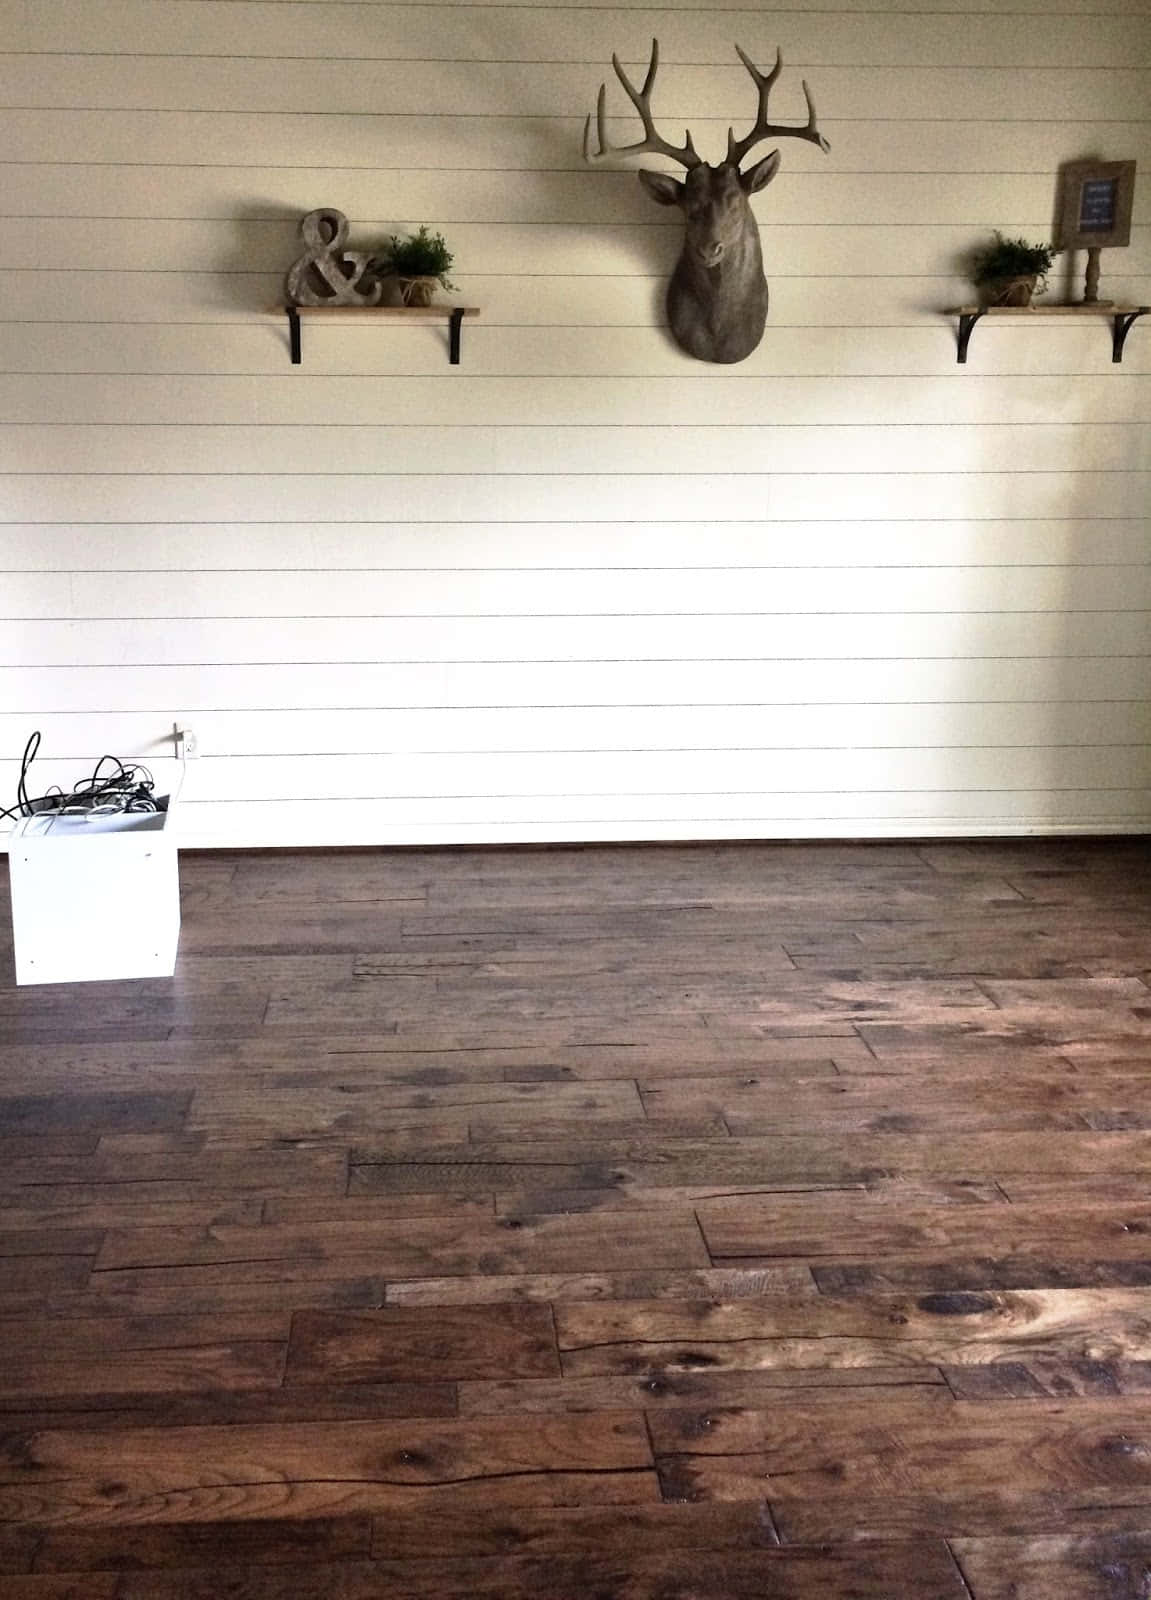 Make Your Home Rustic-Chic with Shiplap